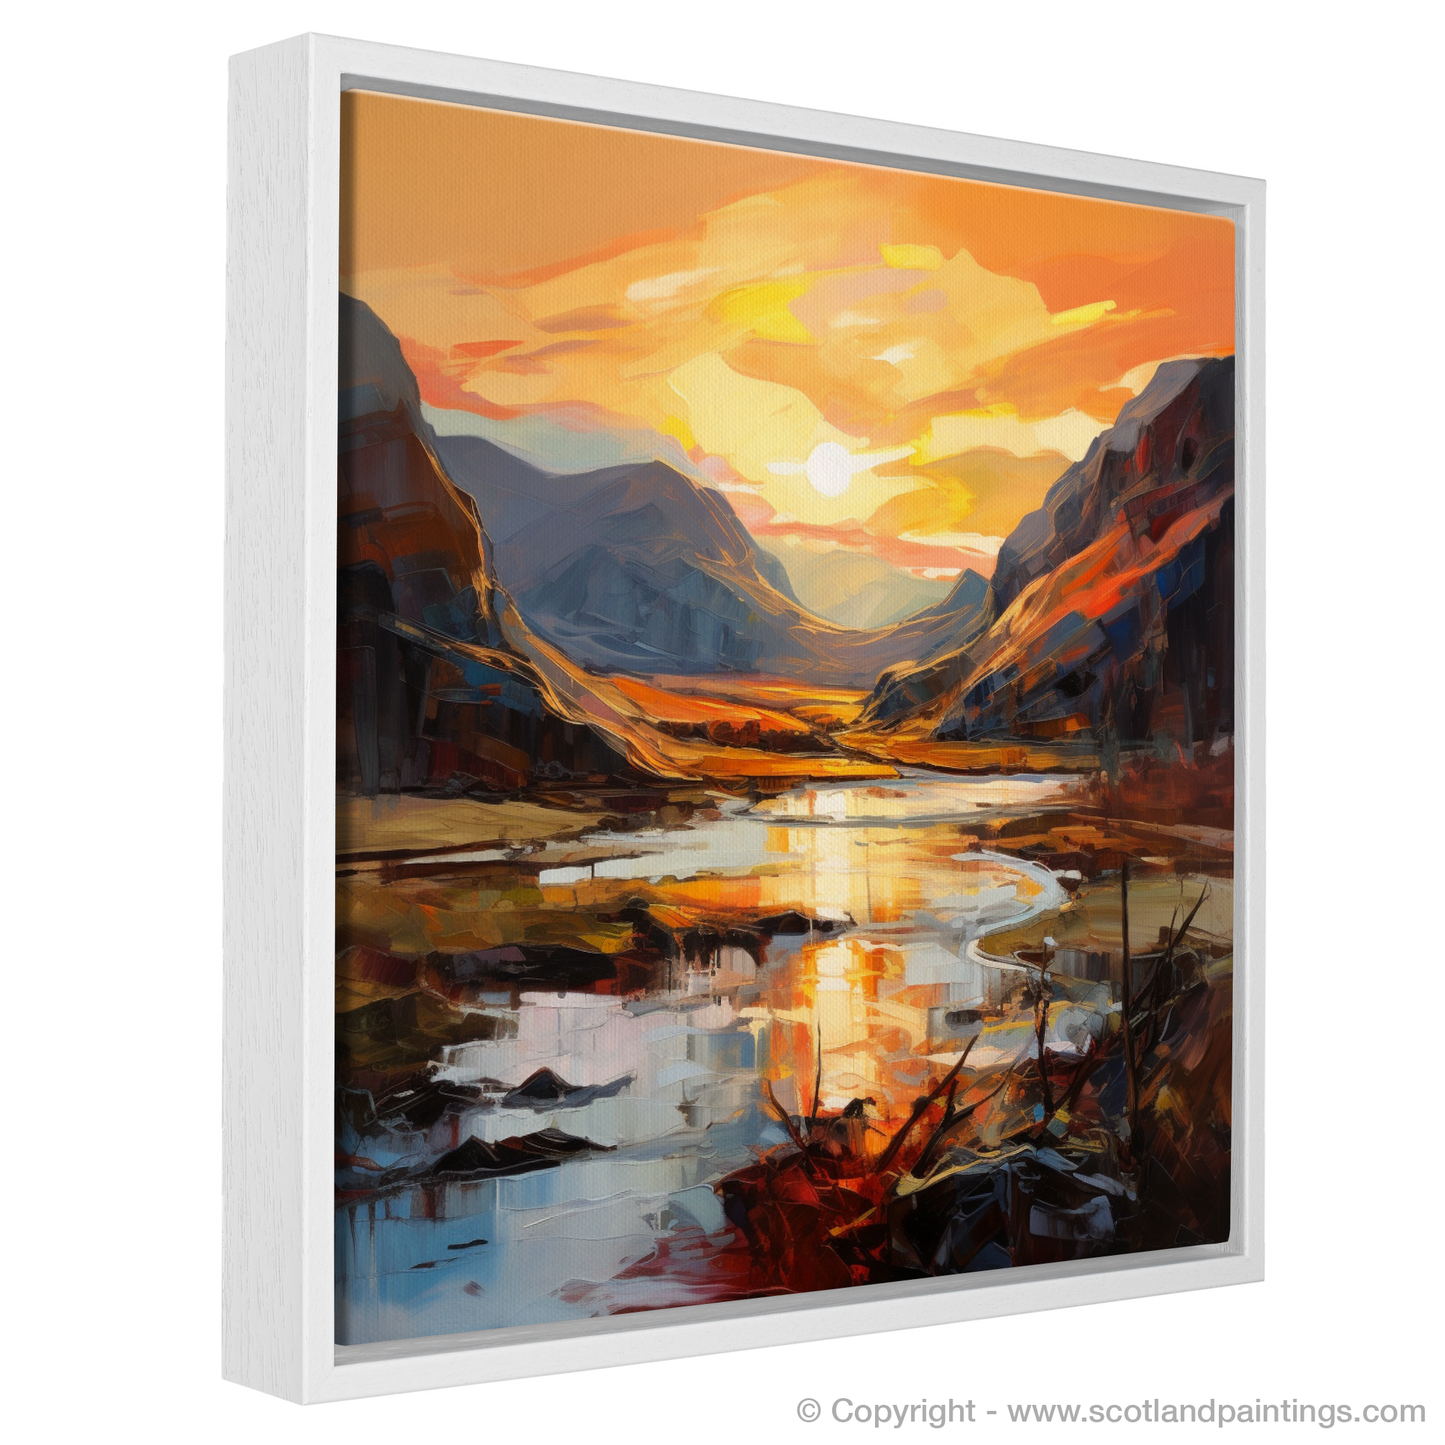 Painting and Art Print of Sunset glow in Glencoe entitled "Sunset Glow in Glencoe: An Expressionist Ode to Nature's Grandeur".